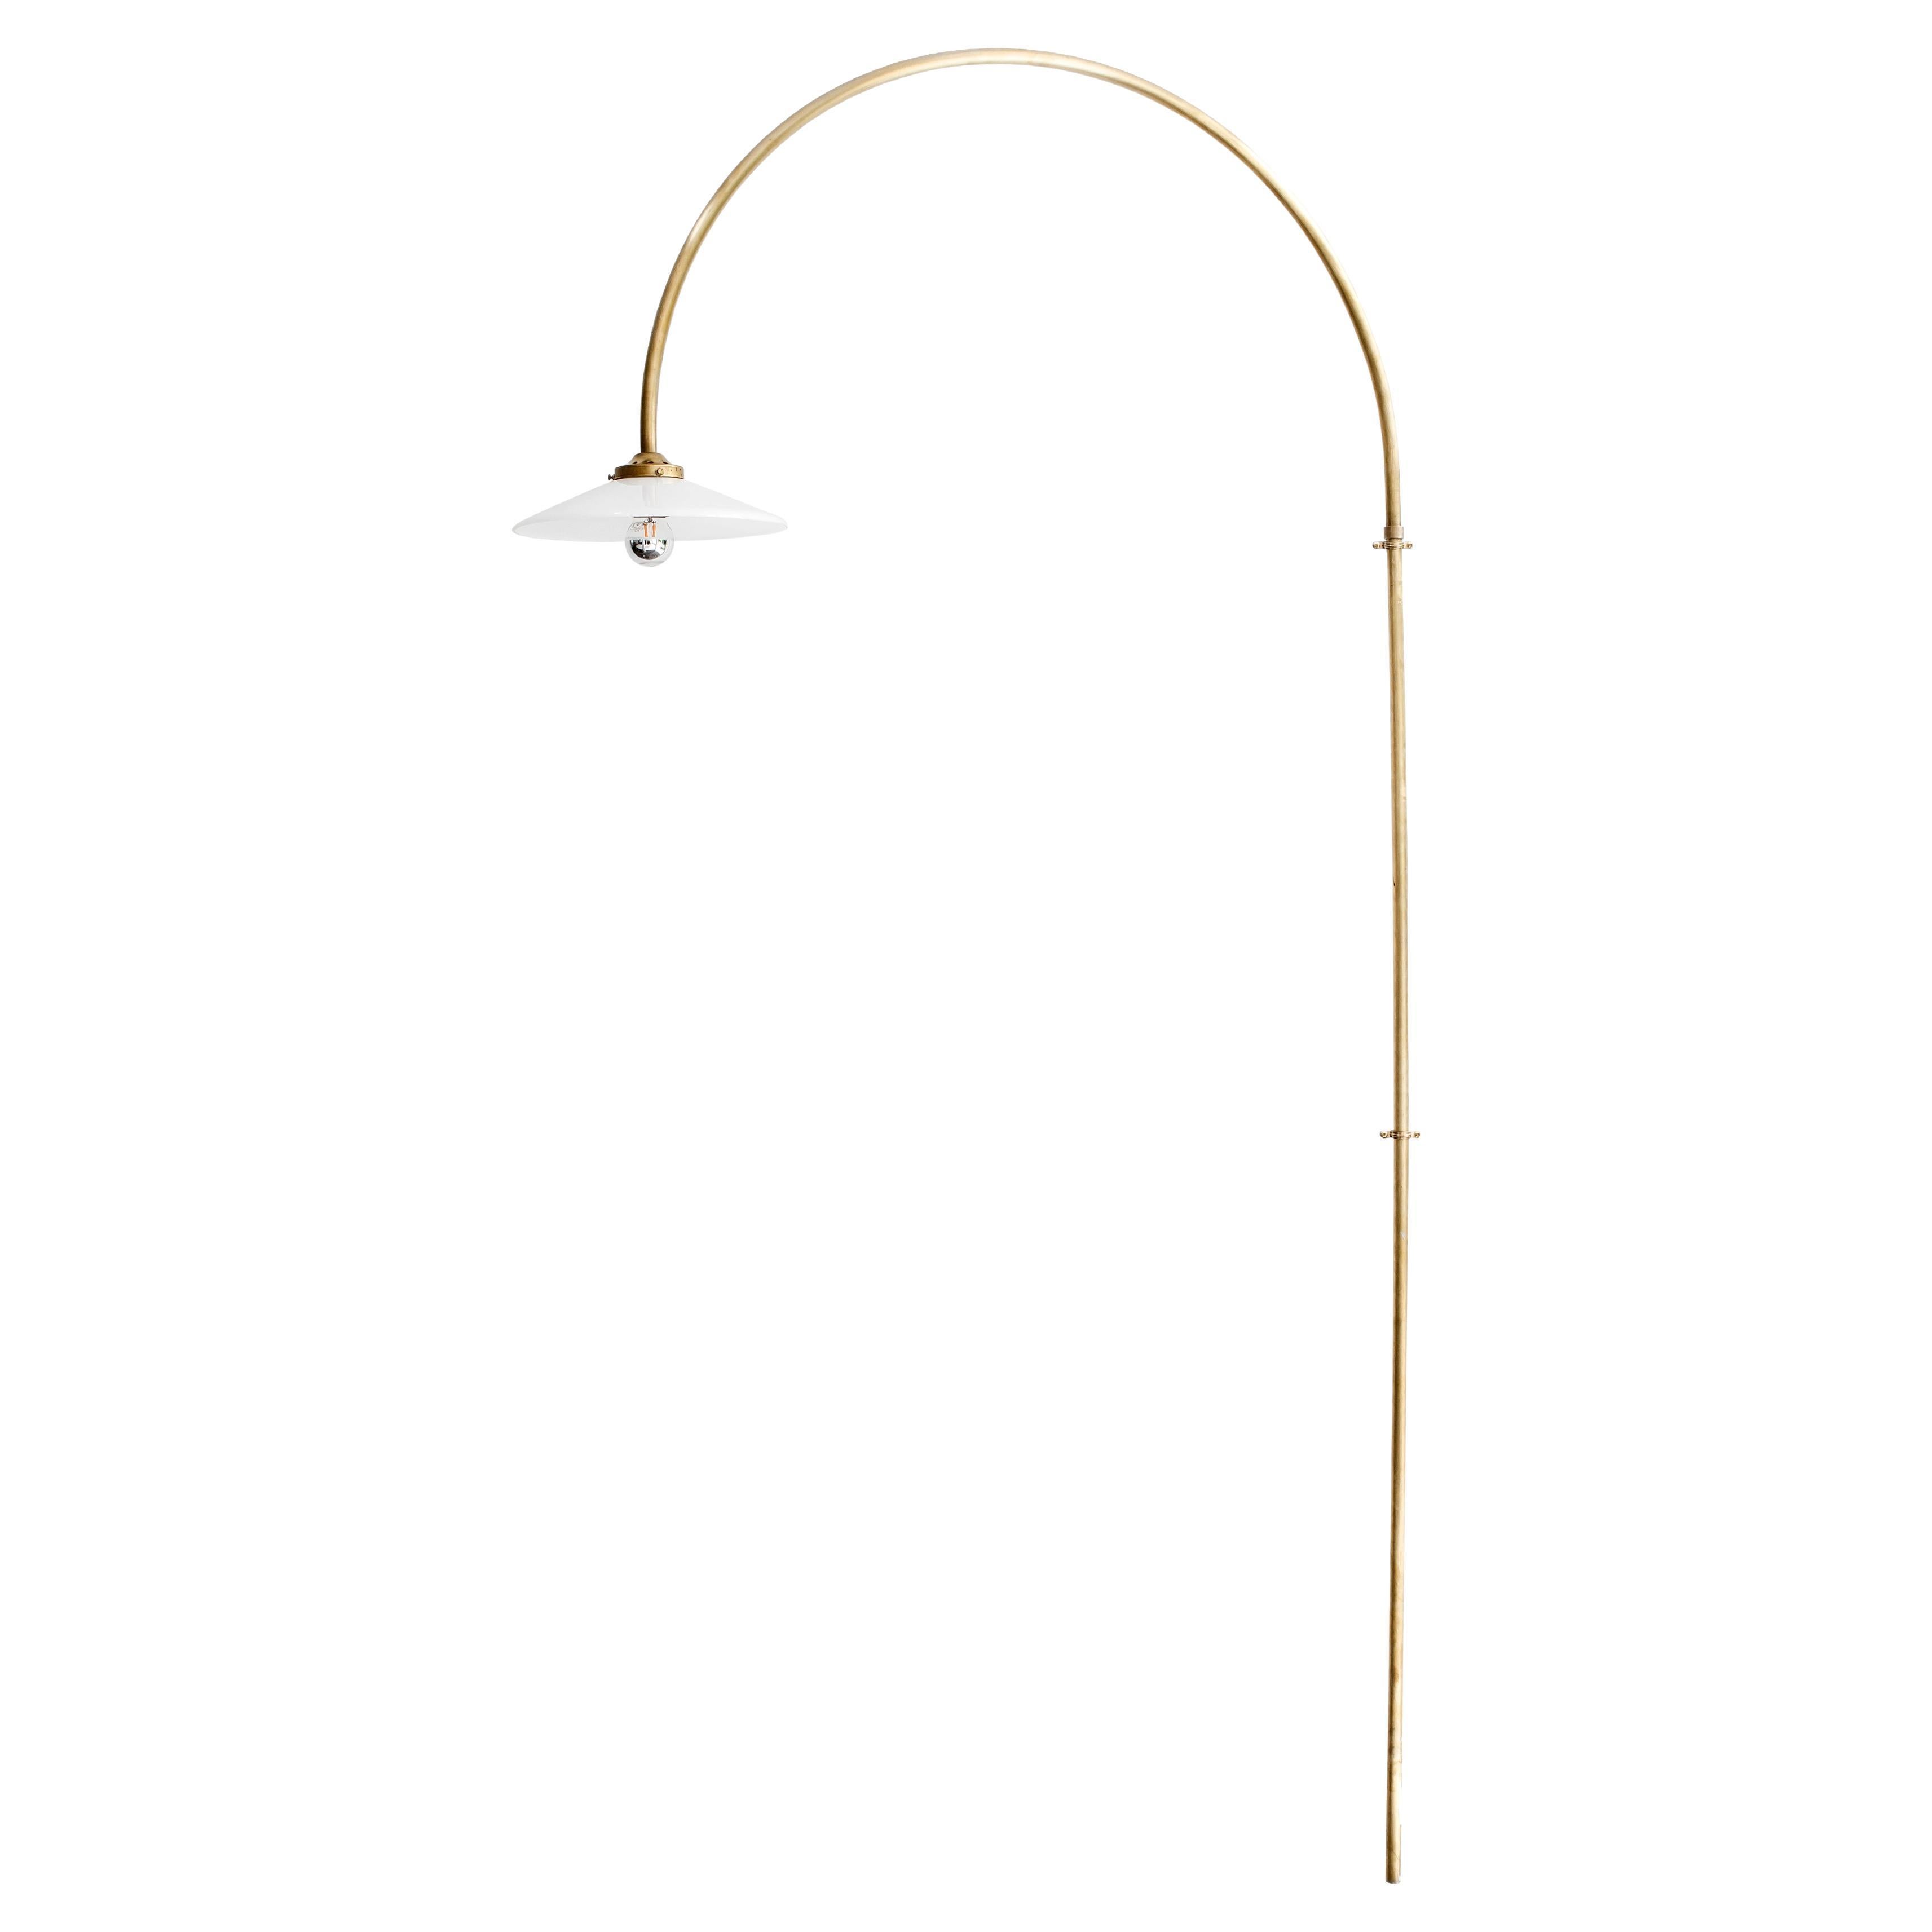 Contemporary Hanging Lamp N°2 by Muller Van Severen x Valerie Objects, Brass